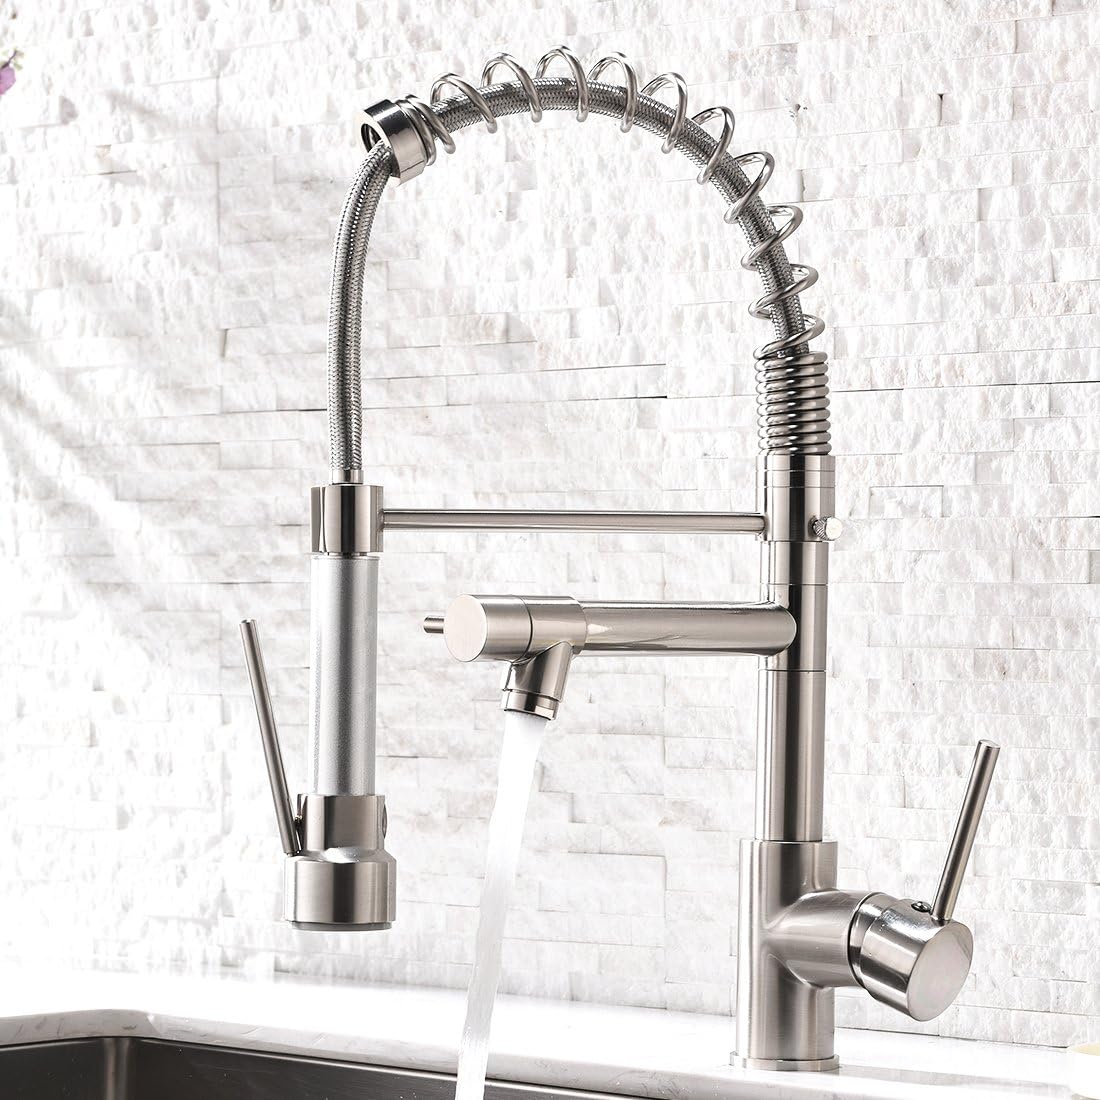 I am extremely pleased with this purchase! Very heavy duty and well made! The water pressure is unbelievable and the fact that you have two different water sprayers makes this very unique. Everyone that has seen my new kitchen raves about this faucet! Highly recommend this one!!! I got the black with silver and it looks very sharp with my black sink!